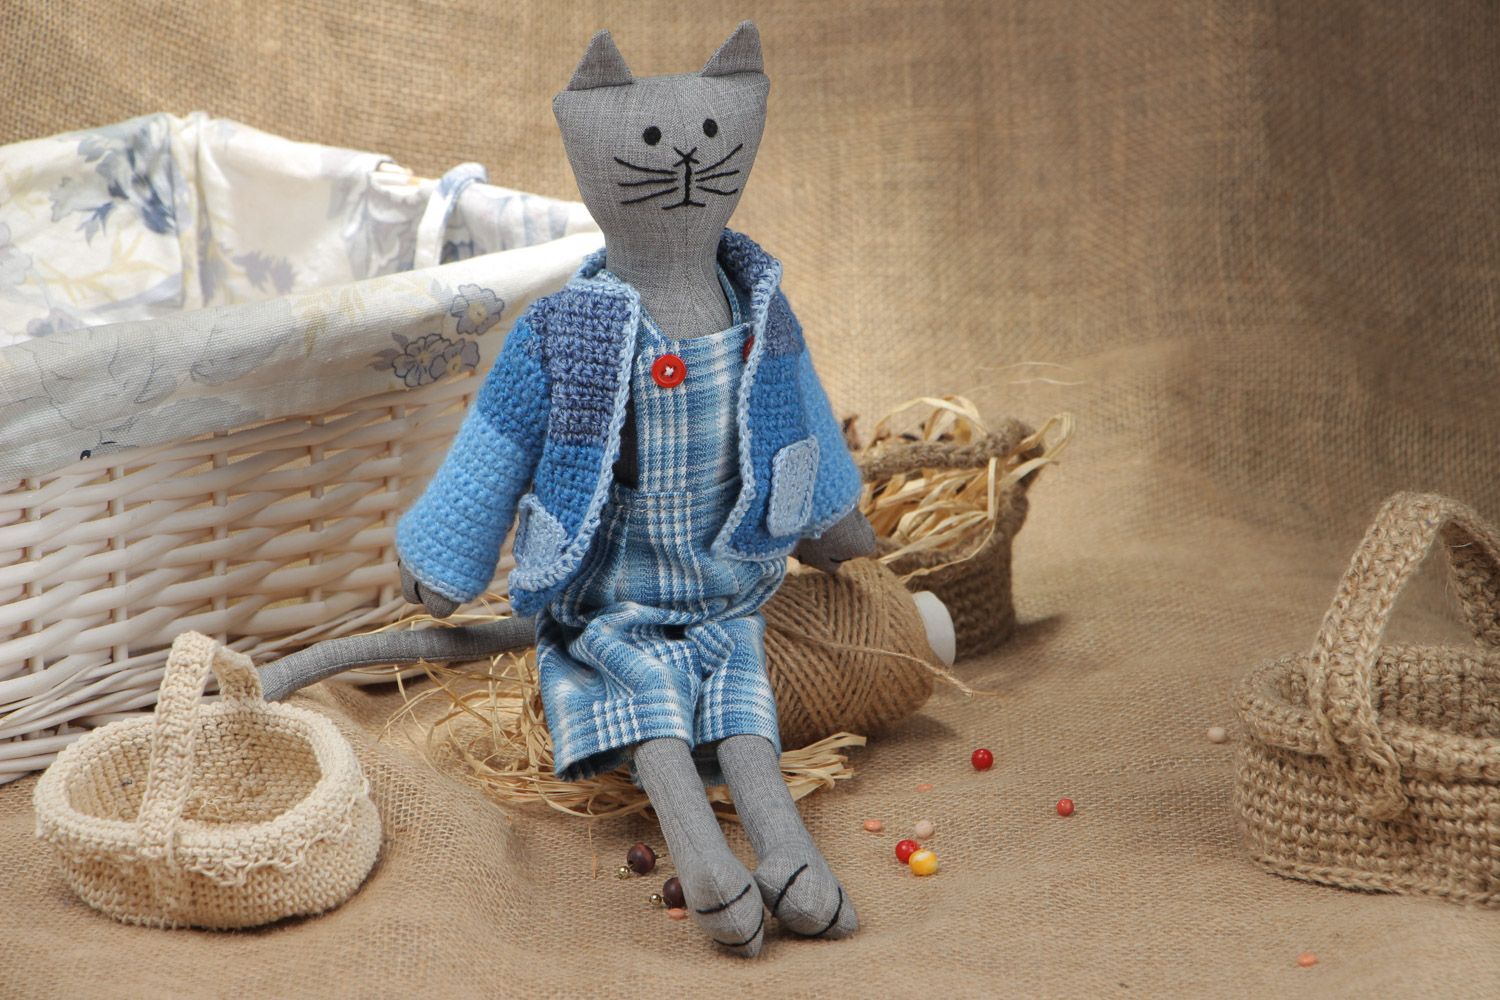 Handmade soft toy sewn of cotton cute gray cat in crocheted blue jacket photo 1